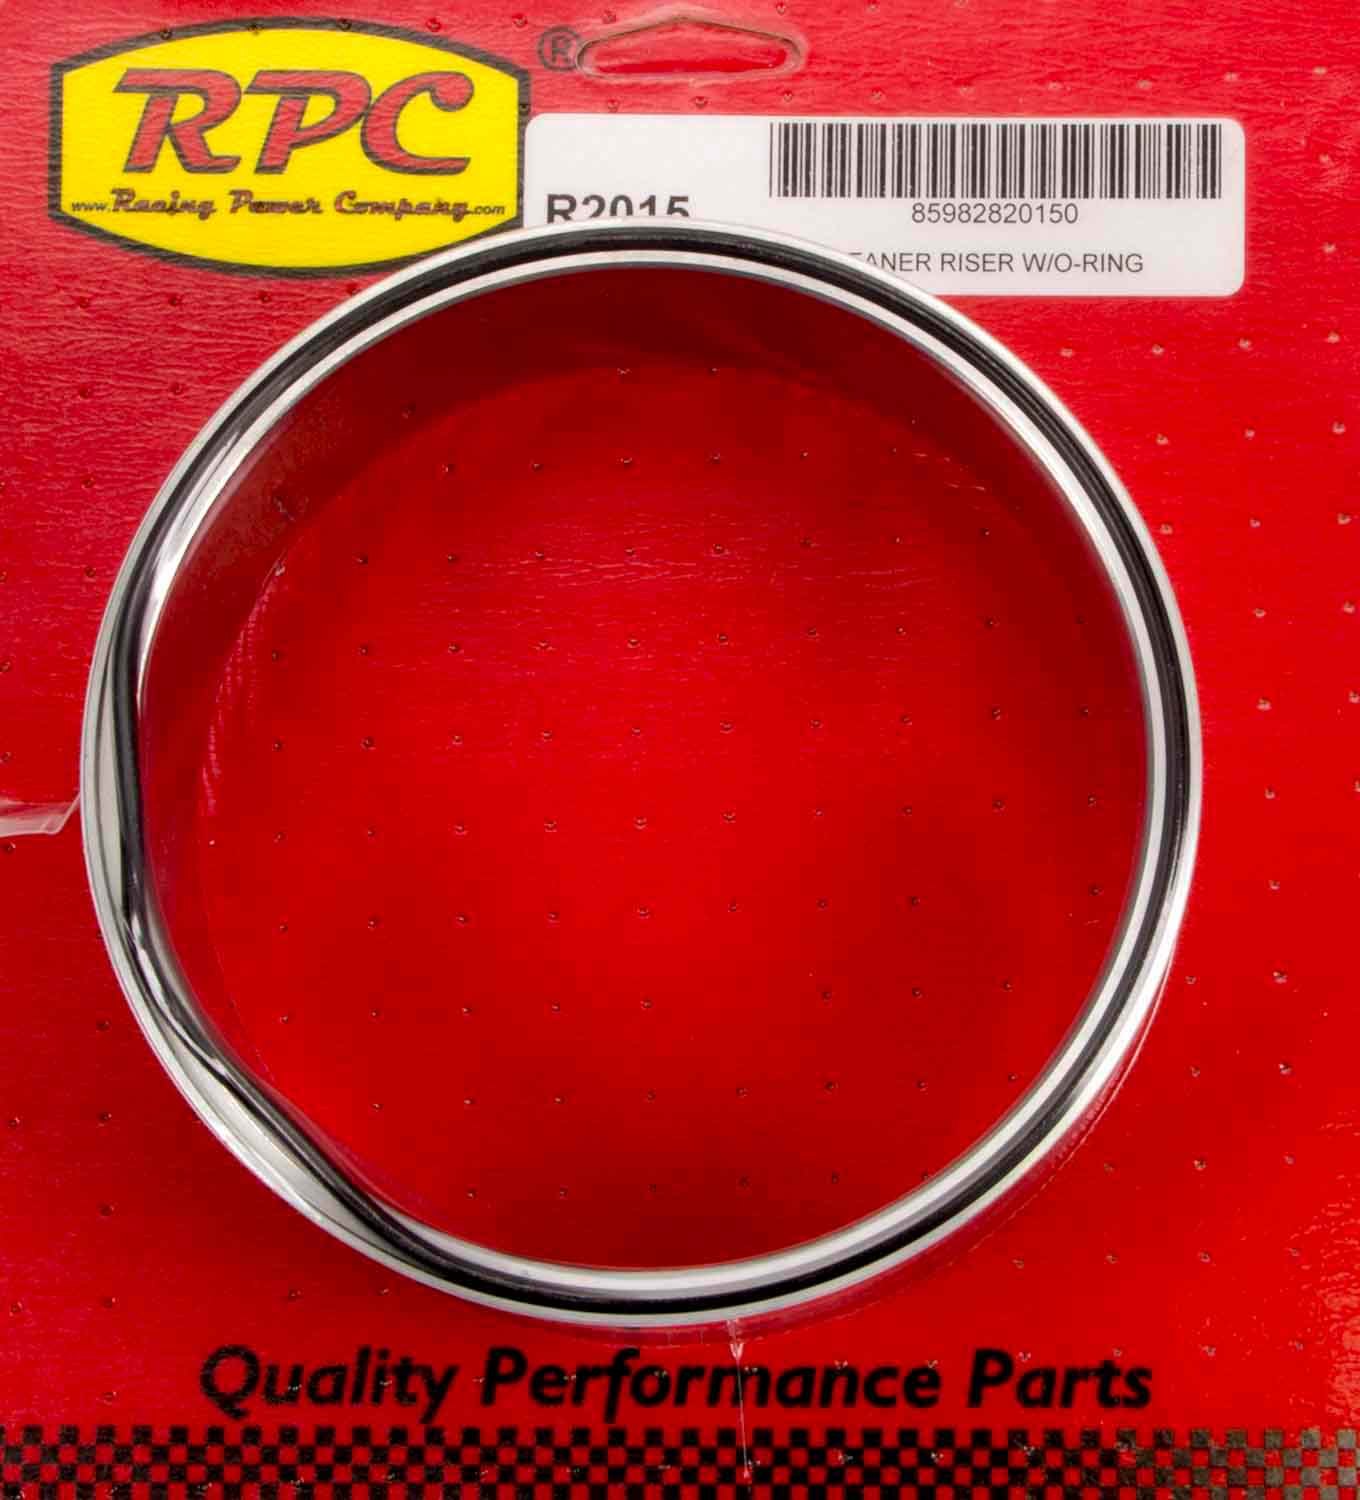 Racing Power Company R2015 Air Cleaner Spacer, 2-1/4 in Thick, 5-1/8 in Carb Flange, Aluminum, Natural, Each